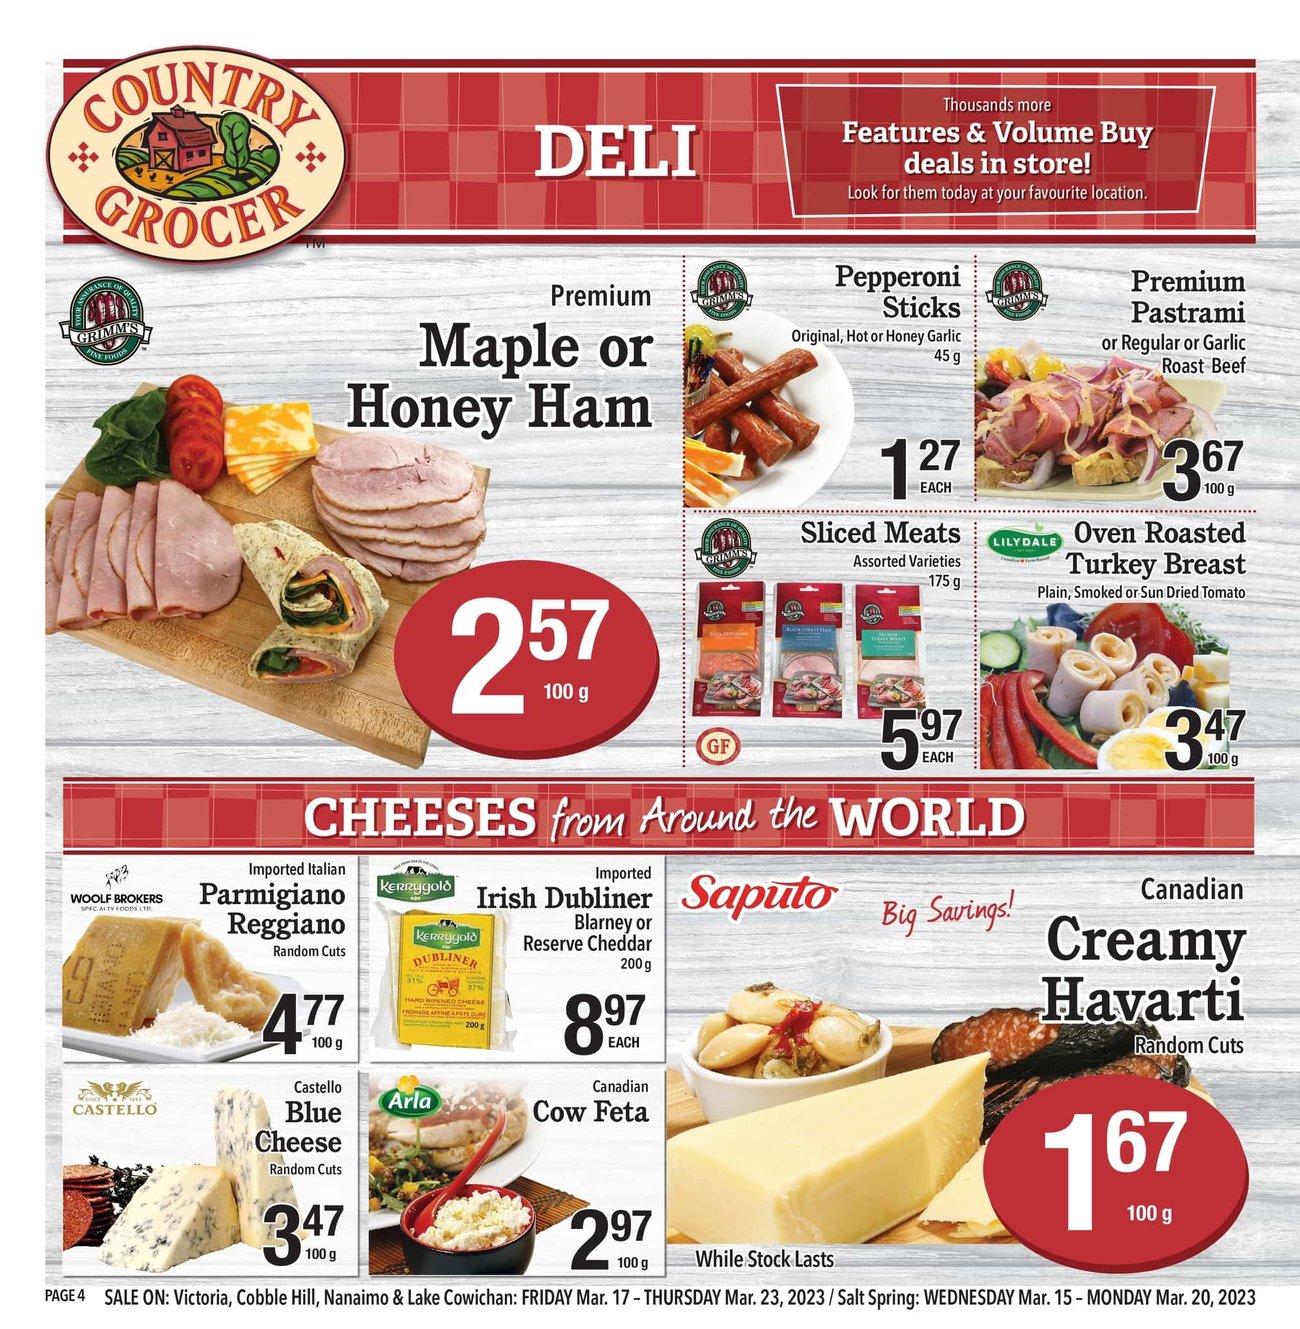 Country Grocer - Weekly Flyer Specials - Page 4